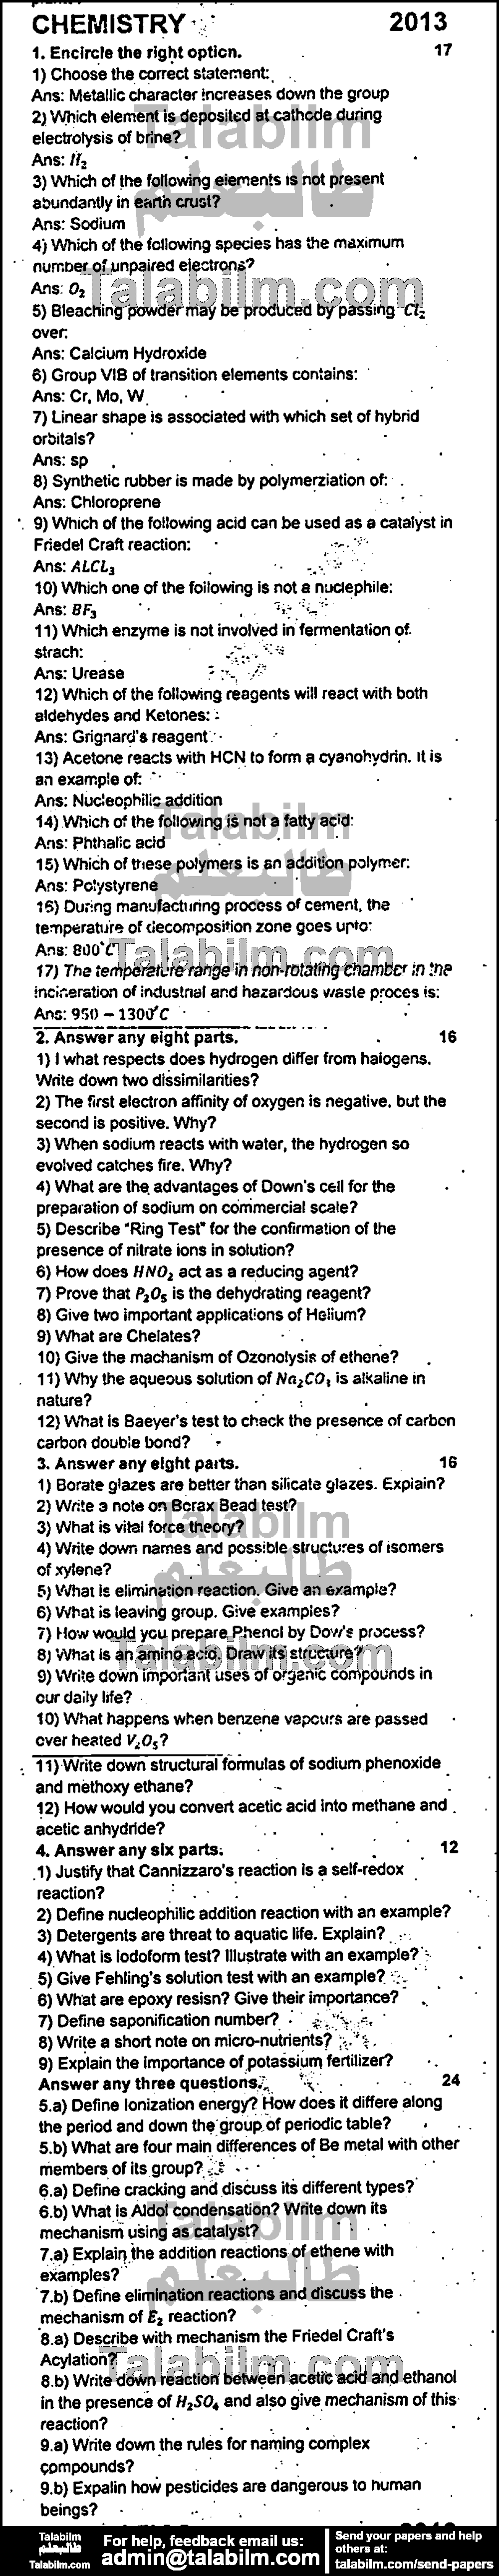 Chemistry 0 past paper for Group-I 2013